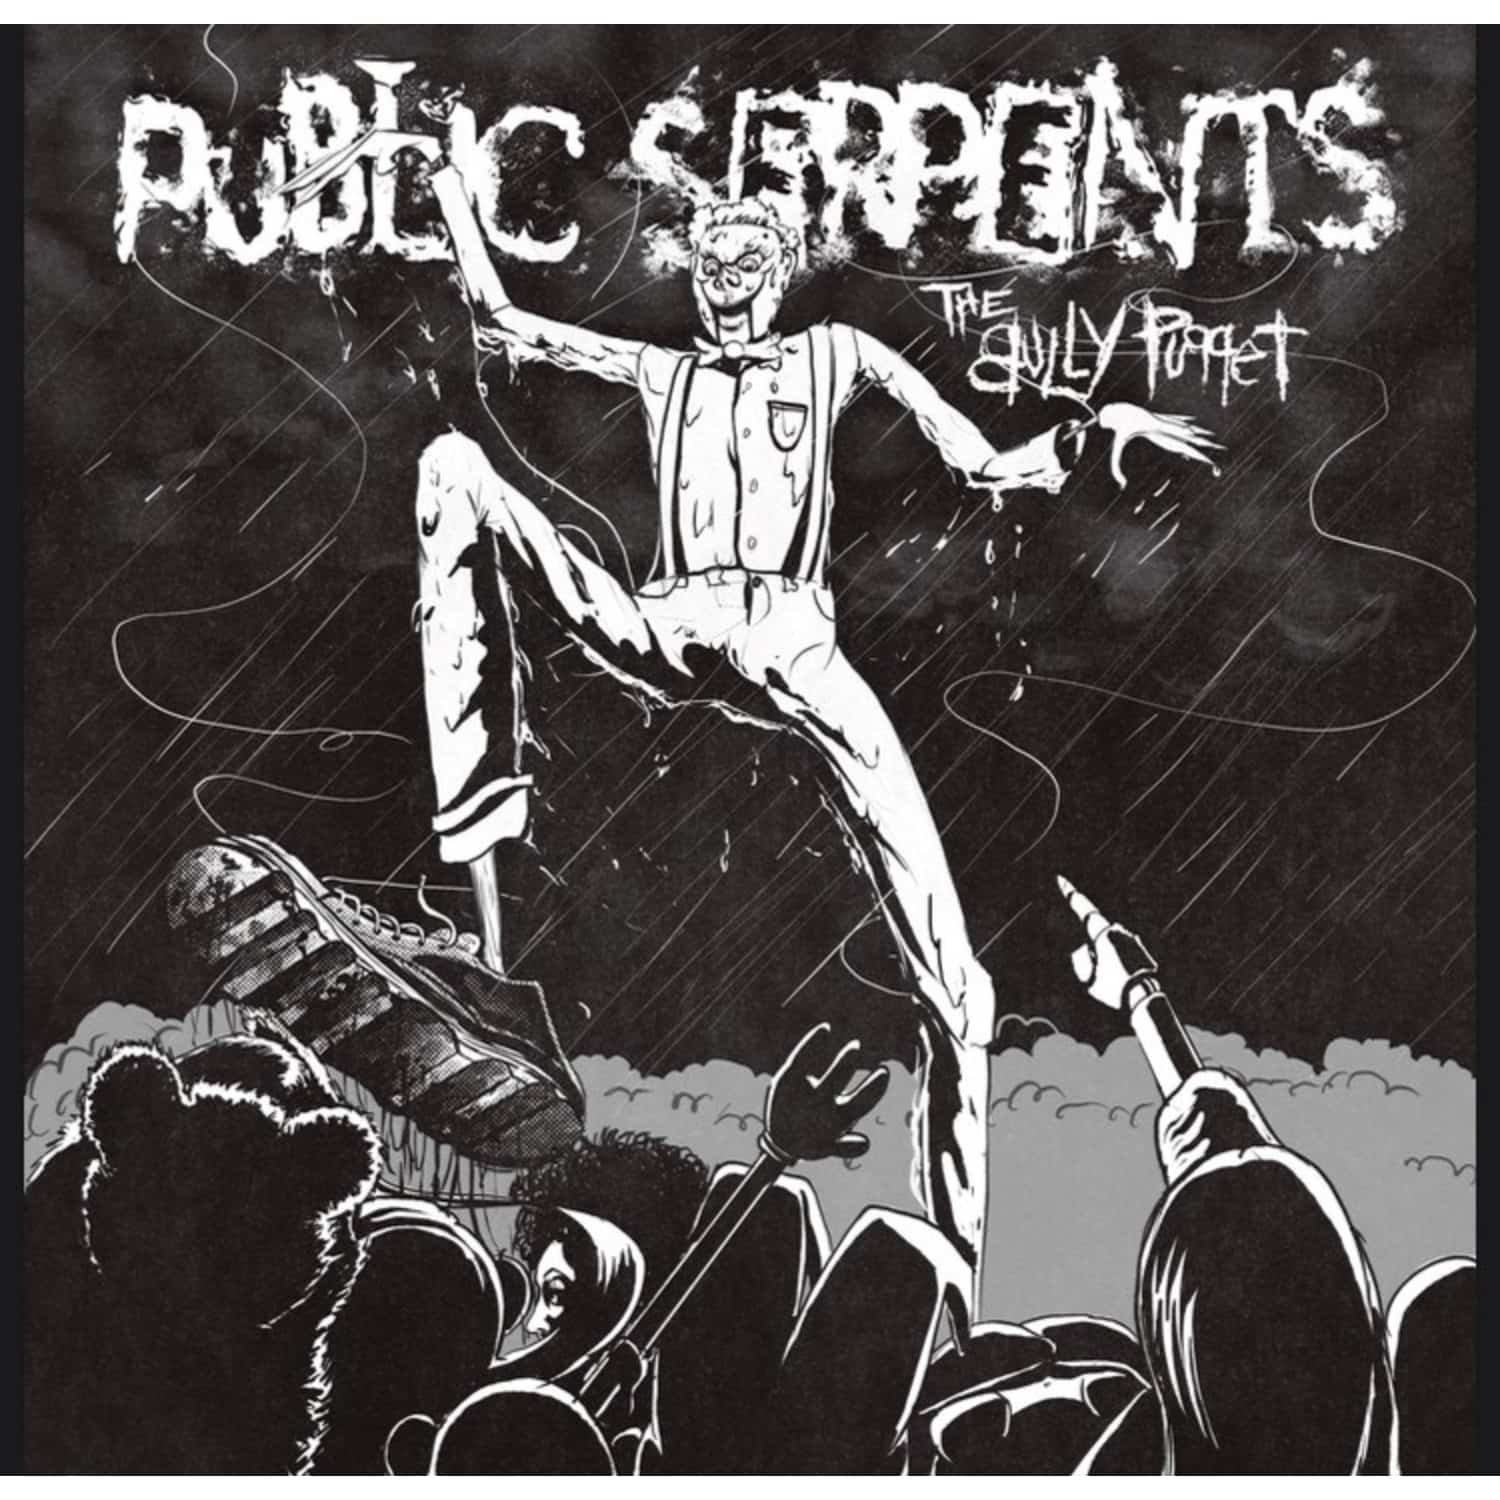 Public Serpents - THE BULLY PUPPET 